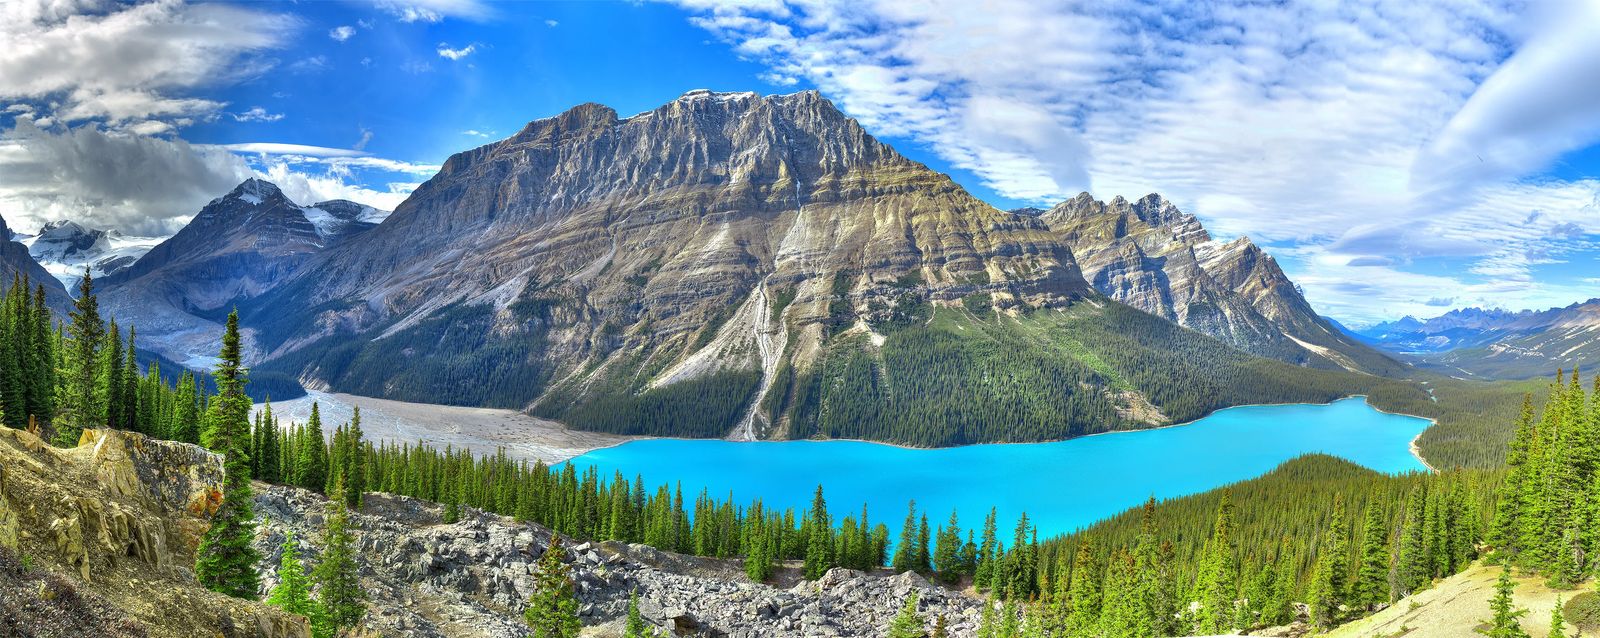 bright blue Peyto Lake that looks like it is the shape of a wolf at the base of the mountains